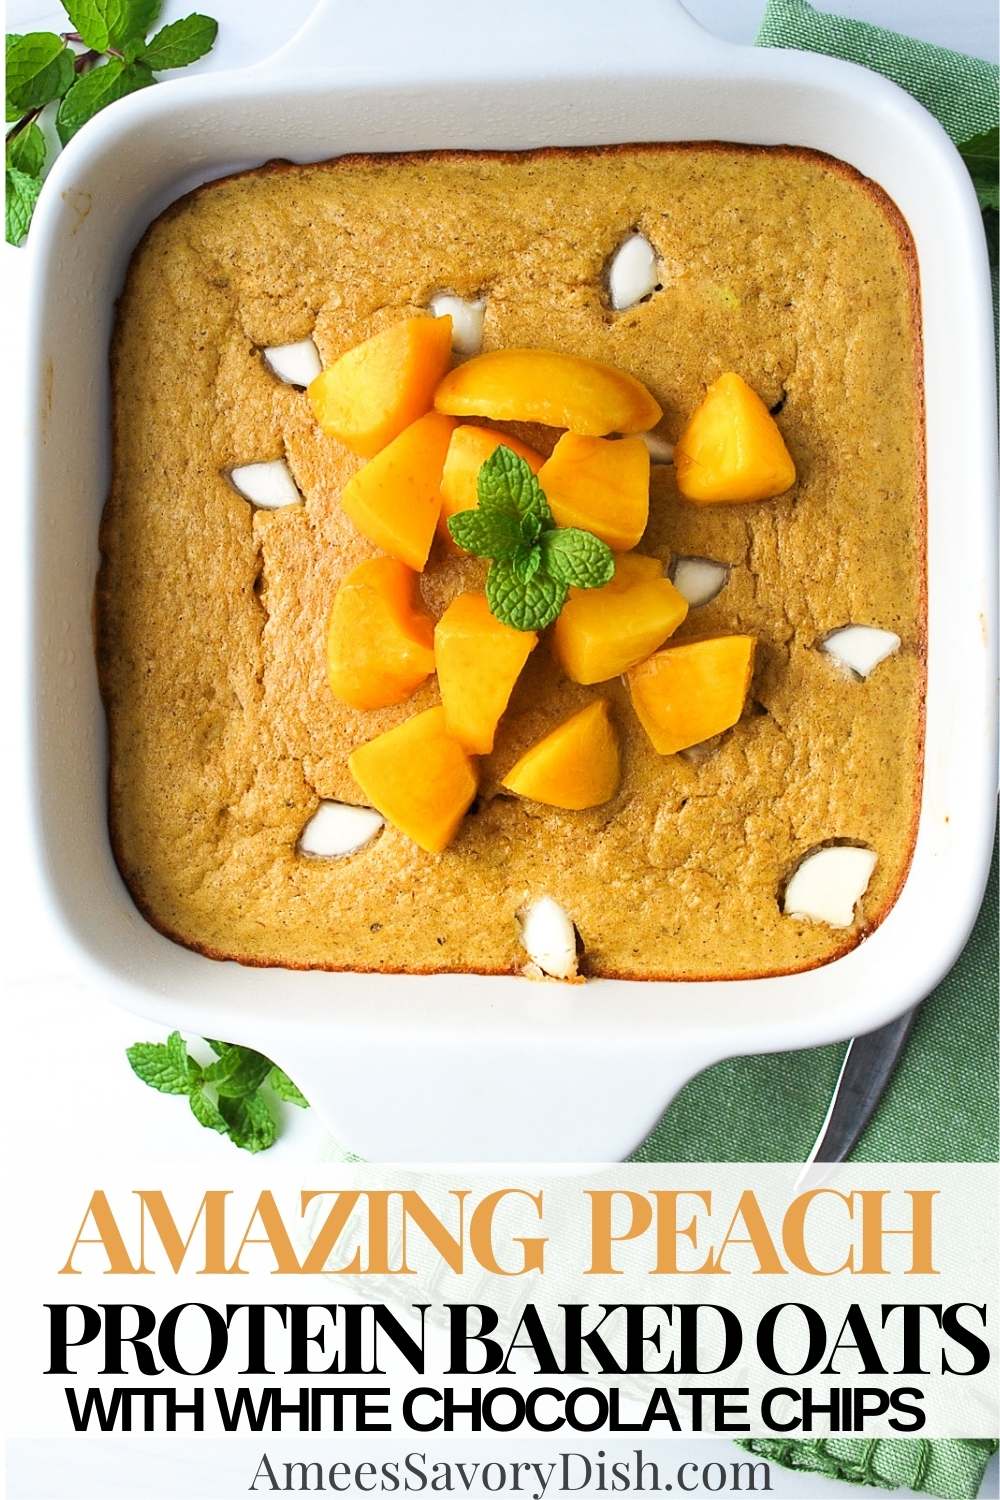 This Peach Protein Baked Oats recipe packs all of the sweet delicious flavors of peach pie into nutritious, cake-like, baked oatmeal. via @Ameessavorydish